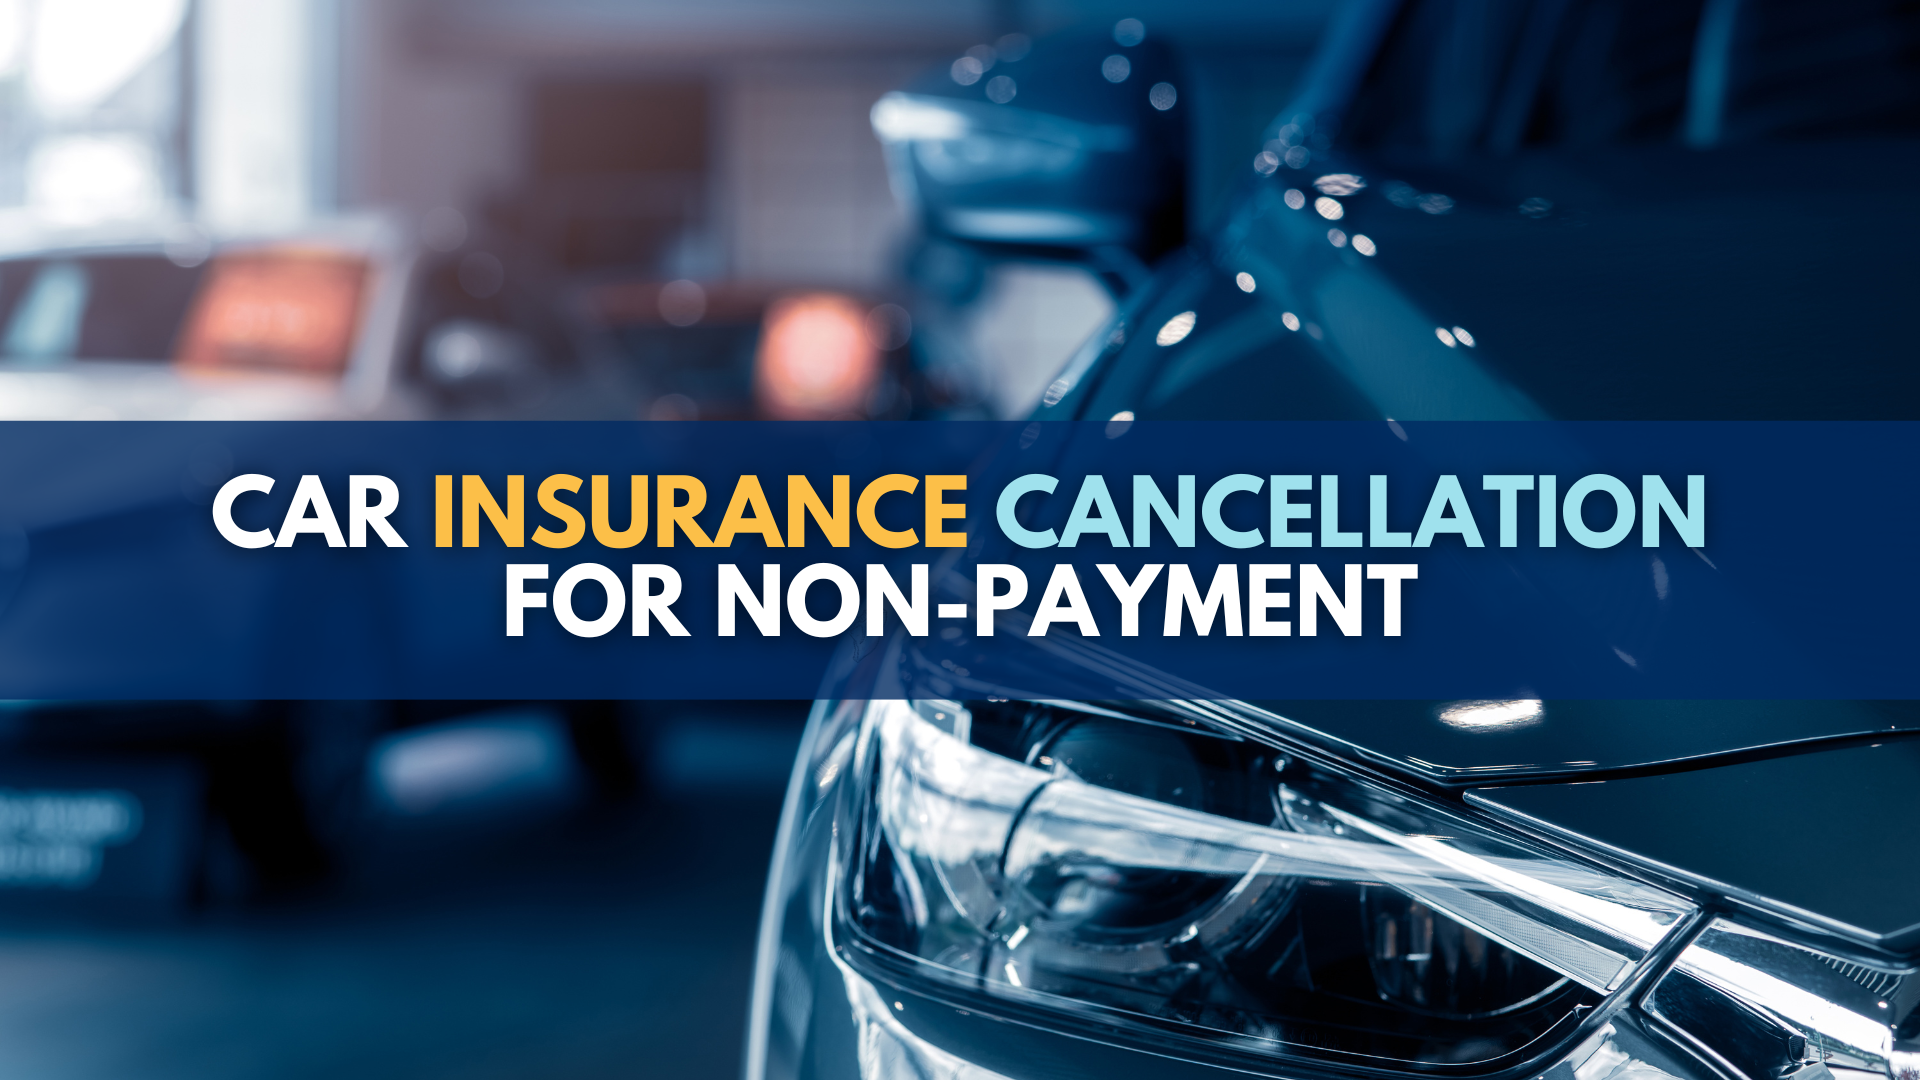 Car insurance cancellation for non-payment